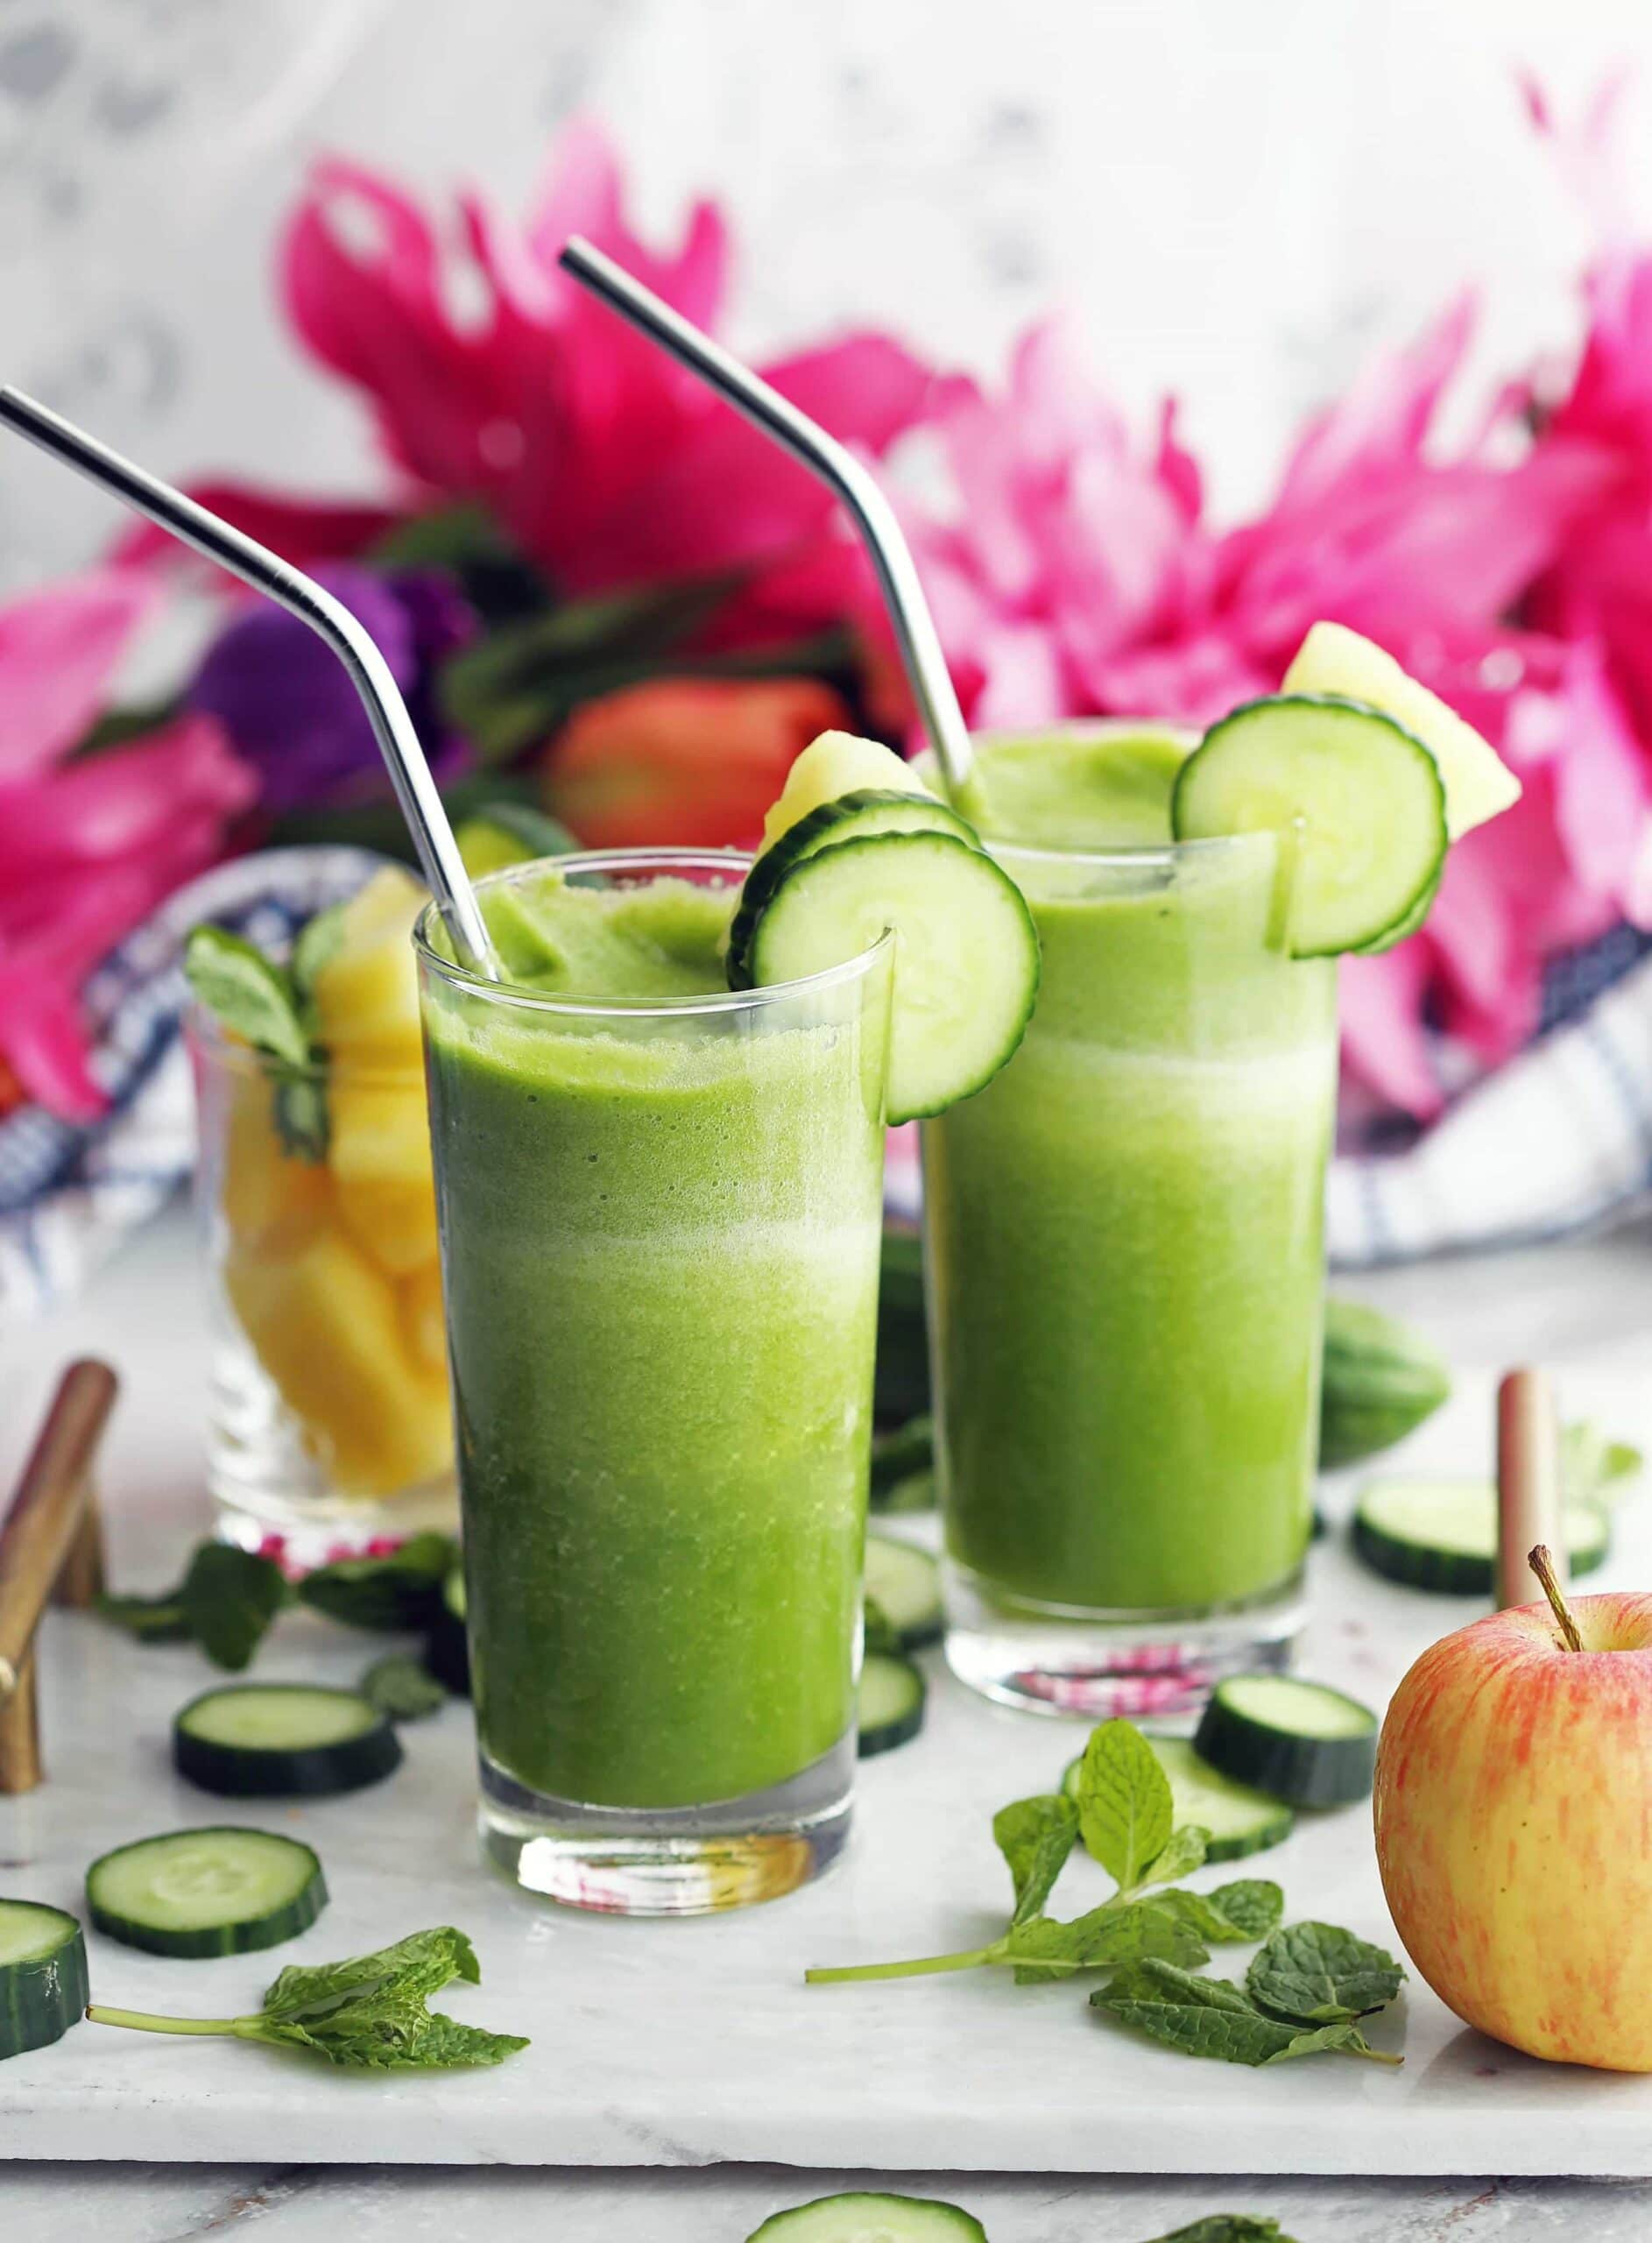 Cucumber Mint Pineapple Smoothie - Yay! For Food